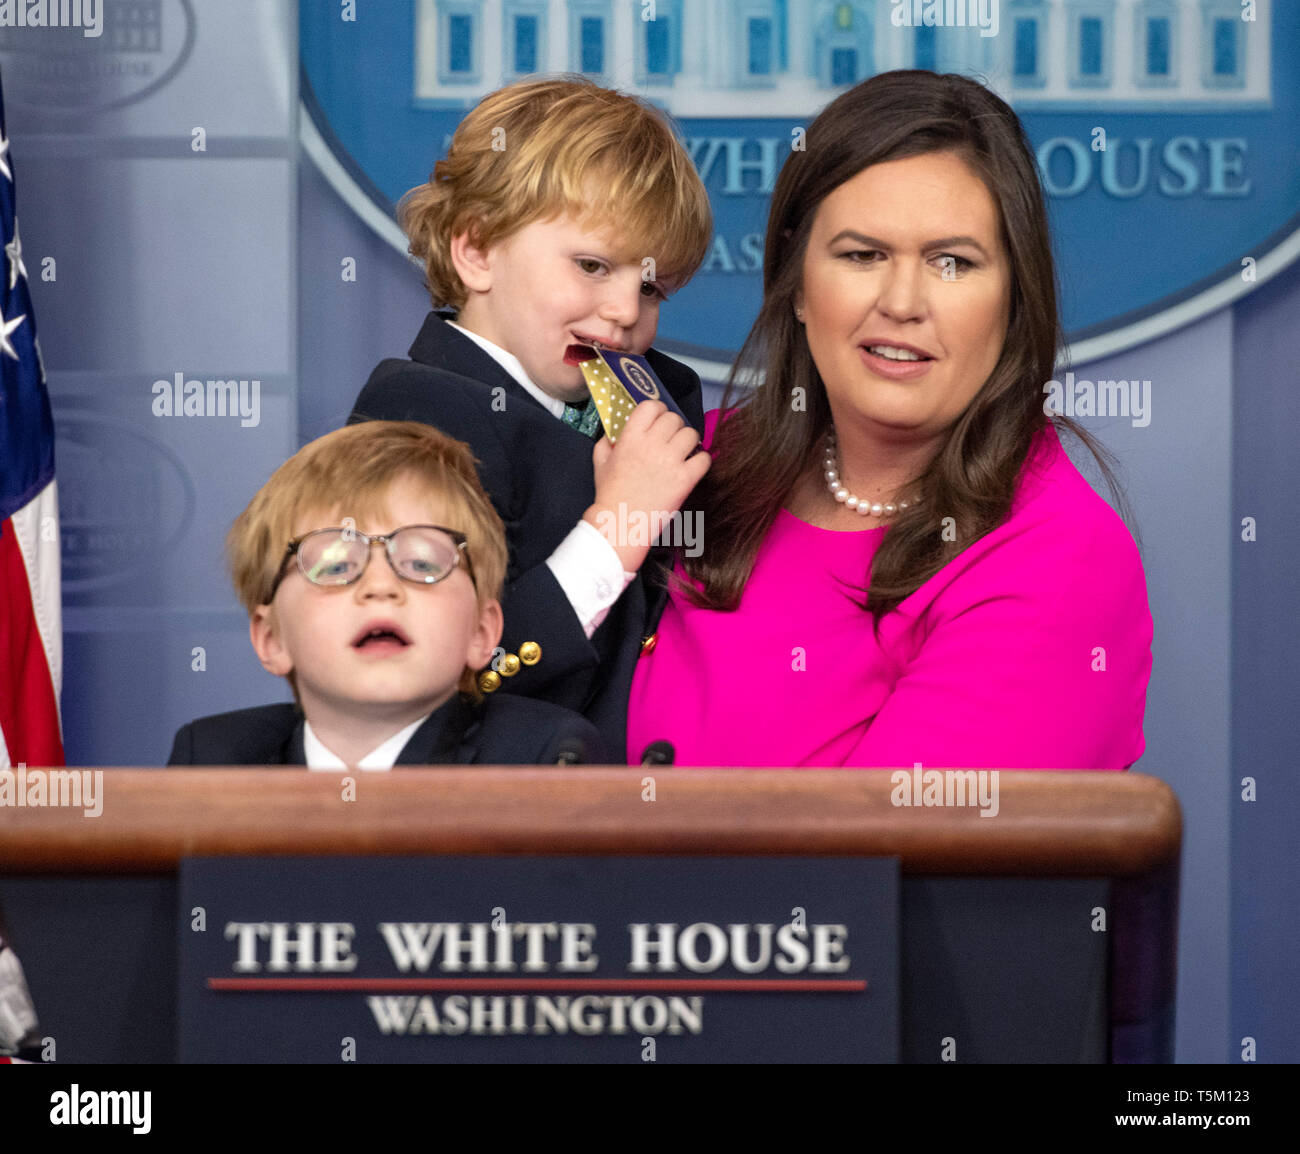 Washington, United States Of America. 25th Apr, 2019. White House Press Secretary Sarah Huckabee Sanders, with her sons, Huck Sanders, lower left, and George Sanders, center, takes questions from children of White House staff and journalists in observance of "Take Our Daughters and Sons to Work Day" in the Brady Press Briefing Room of the White House in Washington, DC on April 25, 2019. Credit: Ron Sachs/Pool via CNP | usage worldwide Credit: dpa/Alamy Live News Stock Photo